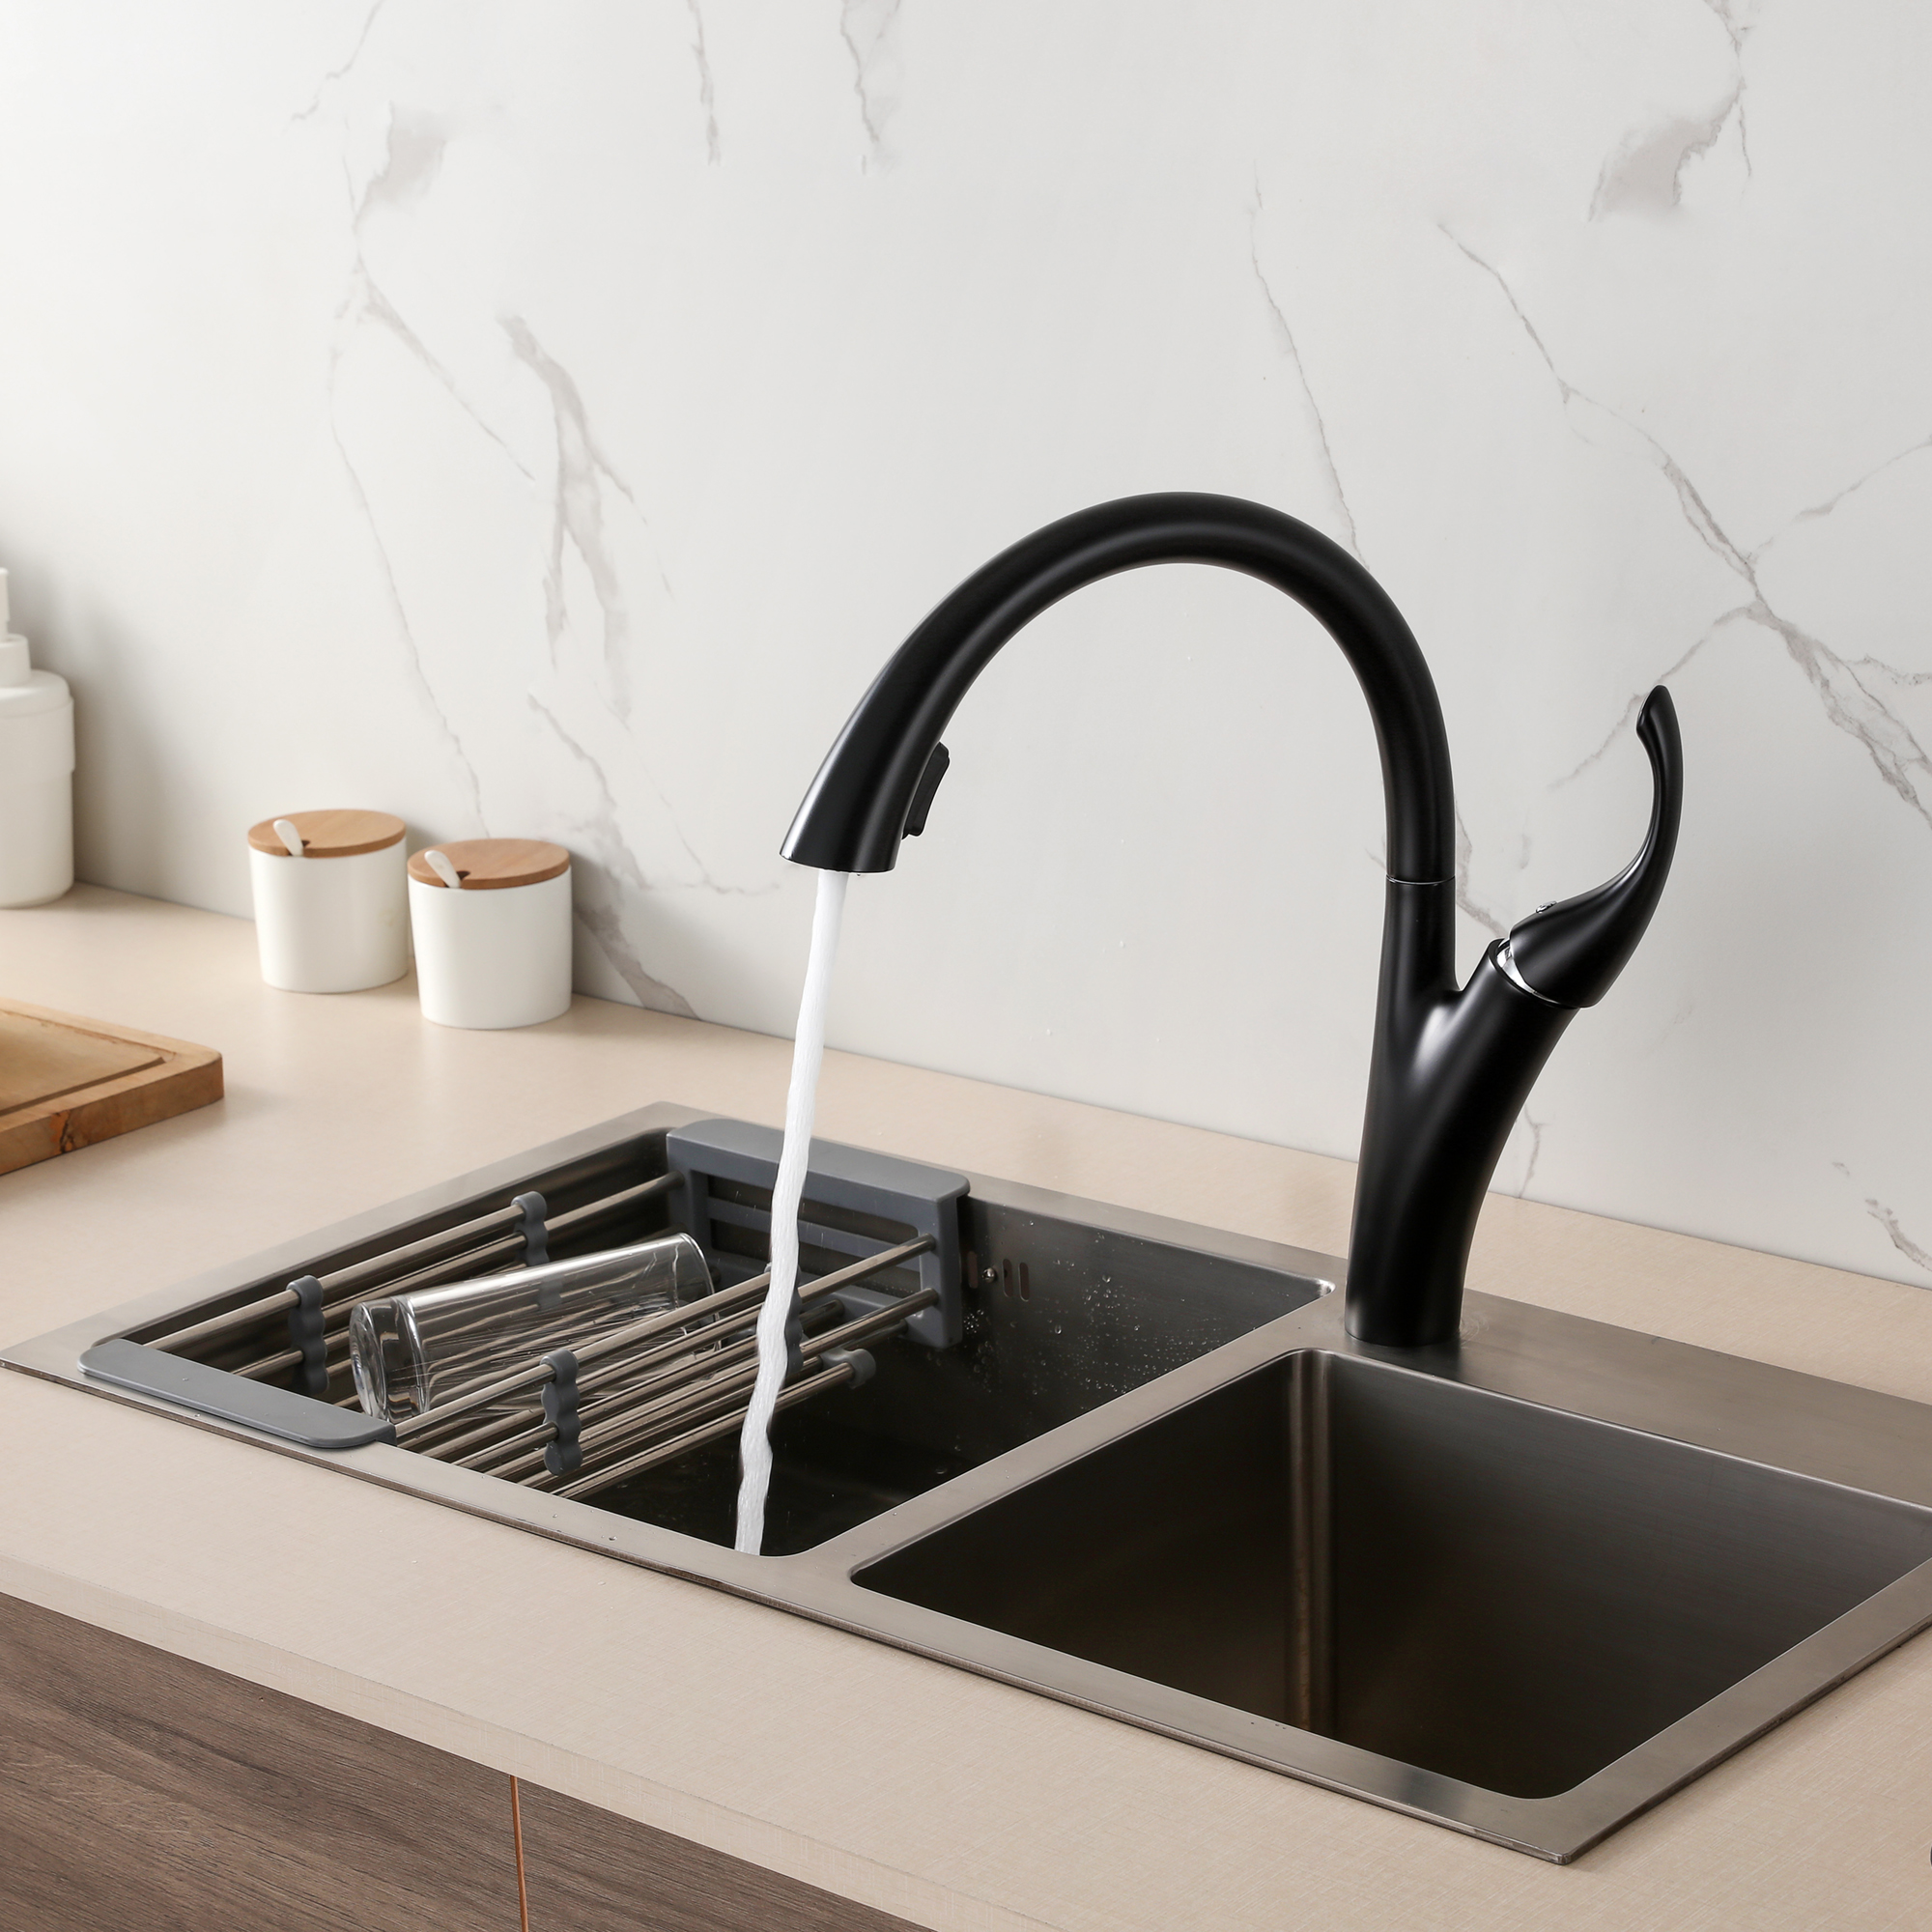 Gowo Neck Water Tap Sink Kitchen Faucet With High Quality